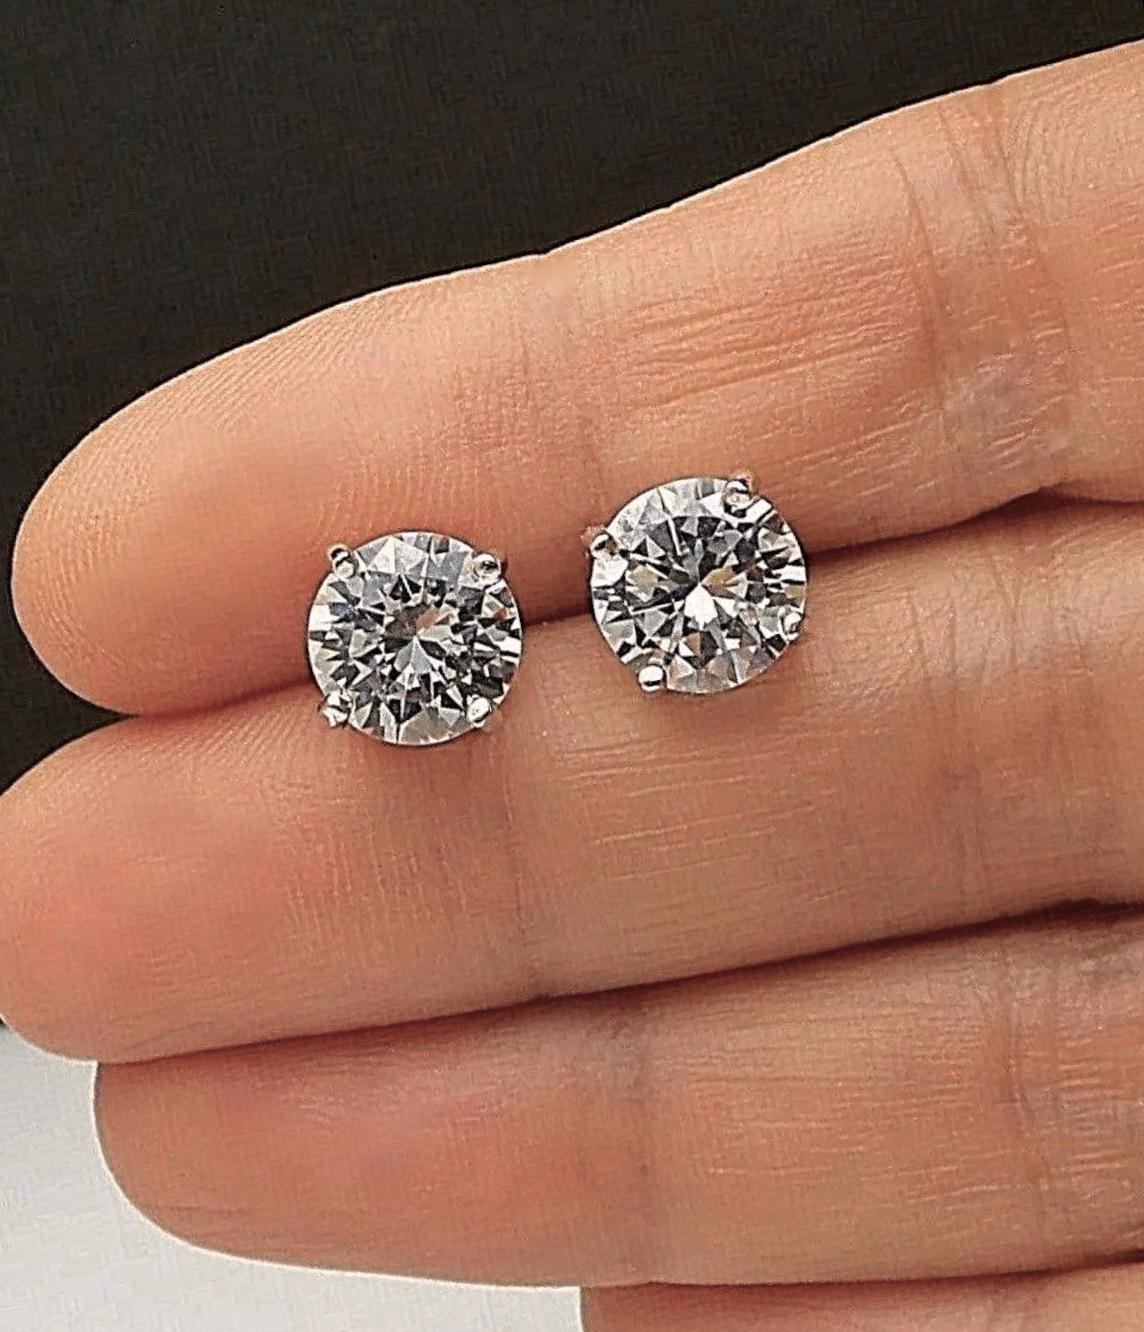 Stunning platinum diamond stud earrings features two natural round brilliant cut diamond totaling 3.20 carats(Clarity Enhanced)
Item Specification:
Gemstone - Diamond
Total Carat Weight - 3.20 Carat
Diamond-Cut - Round
Diamond Clarity - SI1 (Clarity